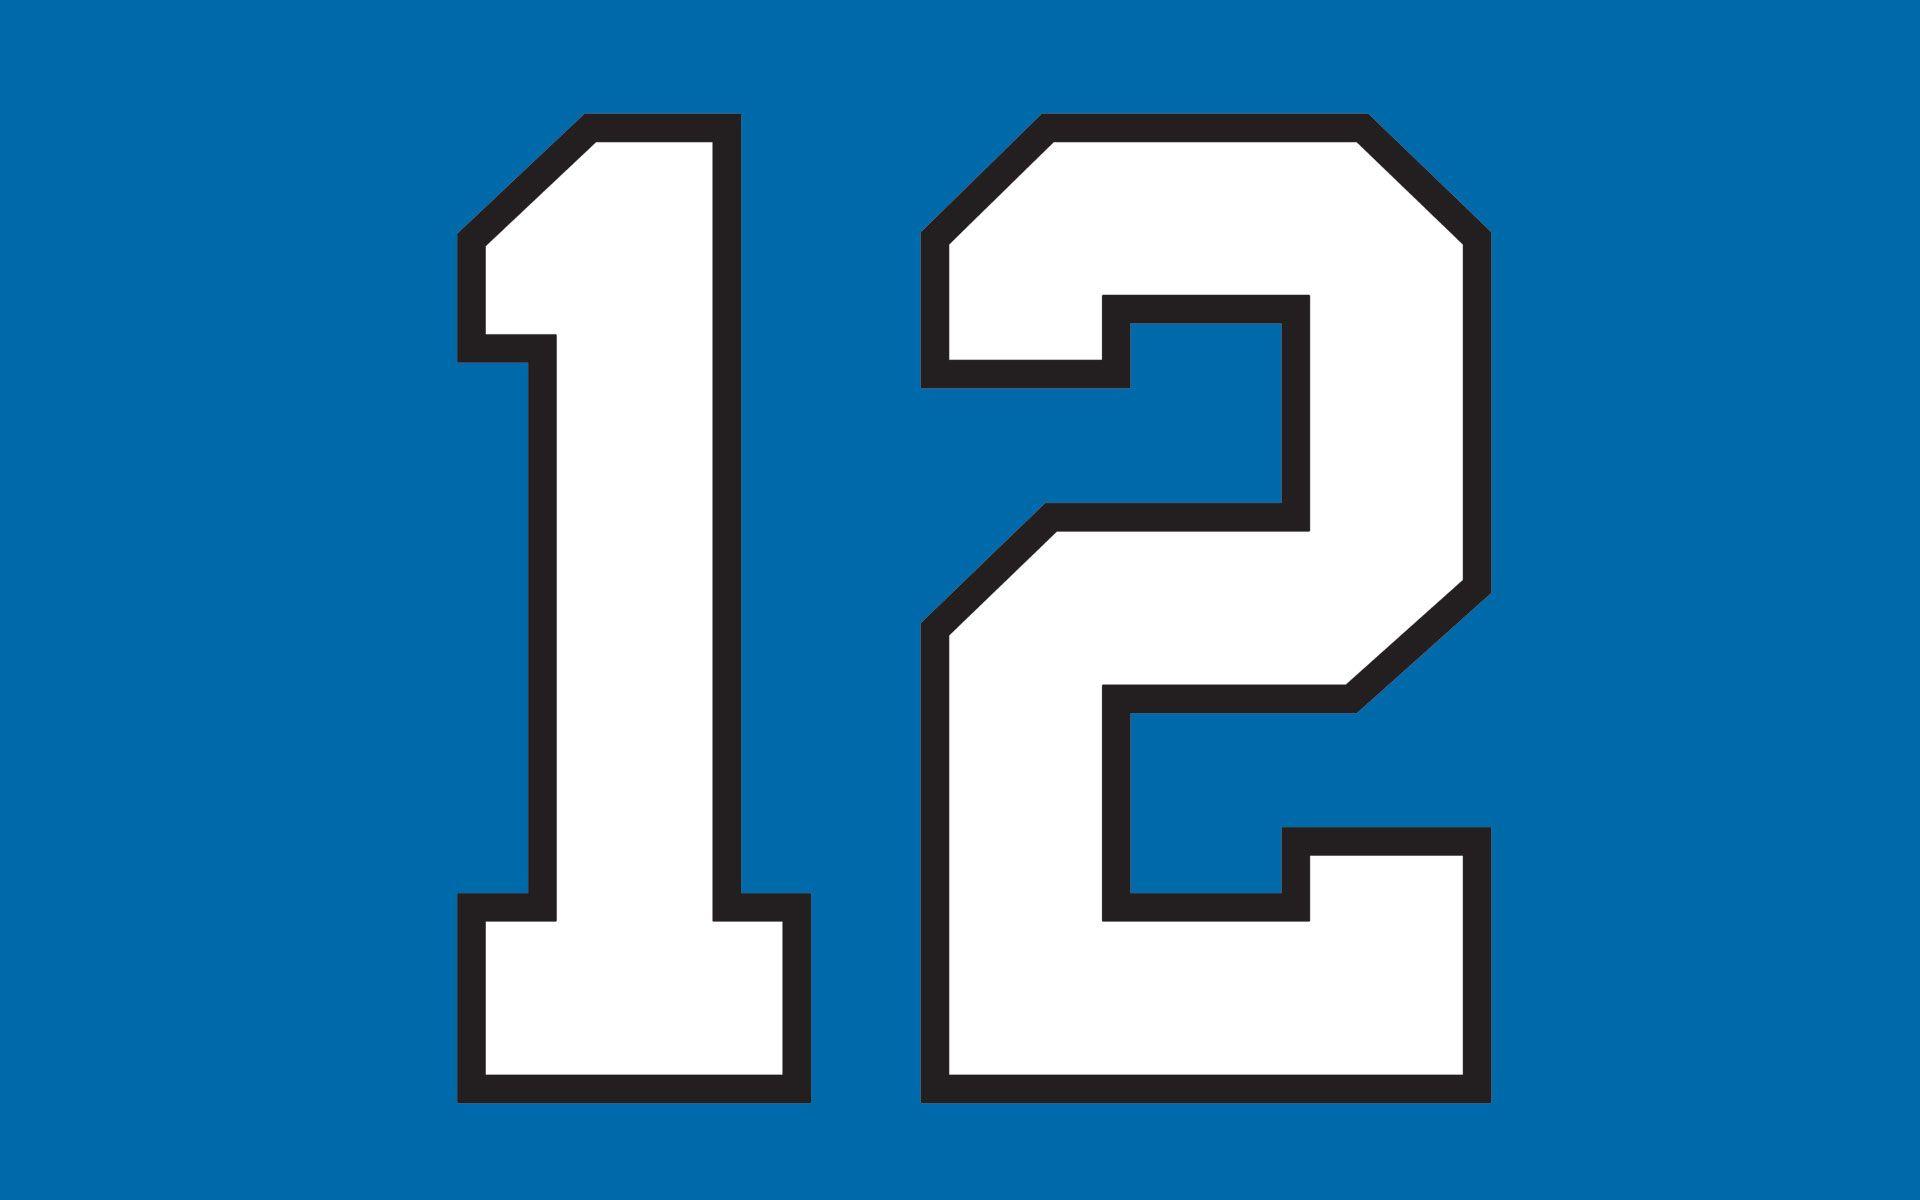 12-Man Logo - Number 12 Image. My Collections / I Am A 12th Man. An Artistic